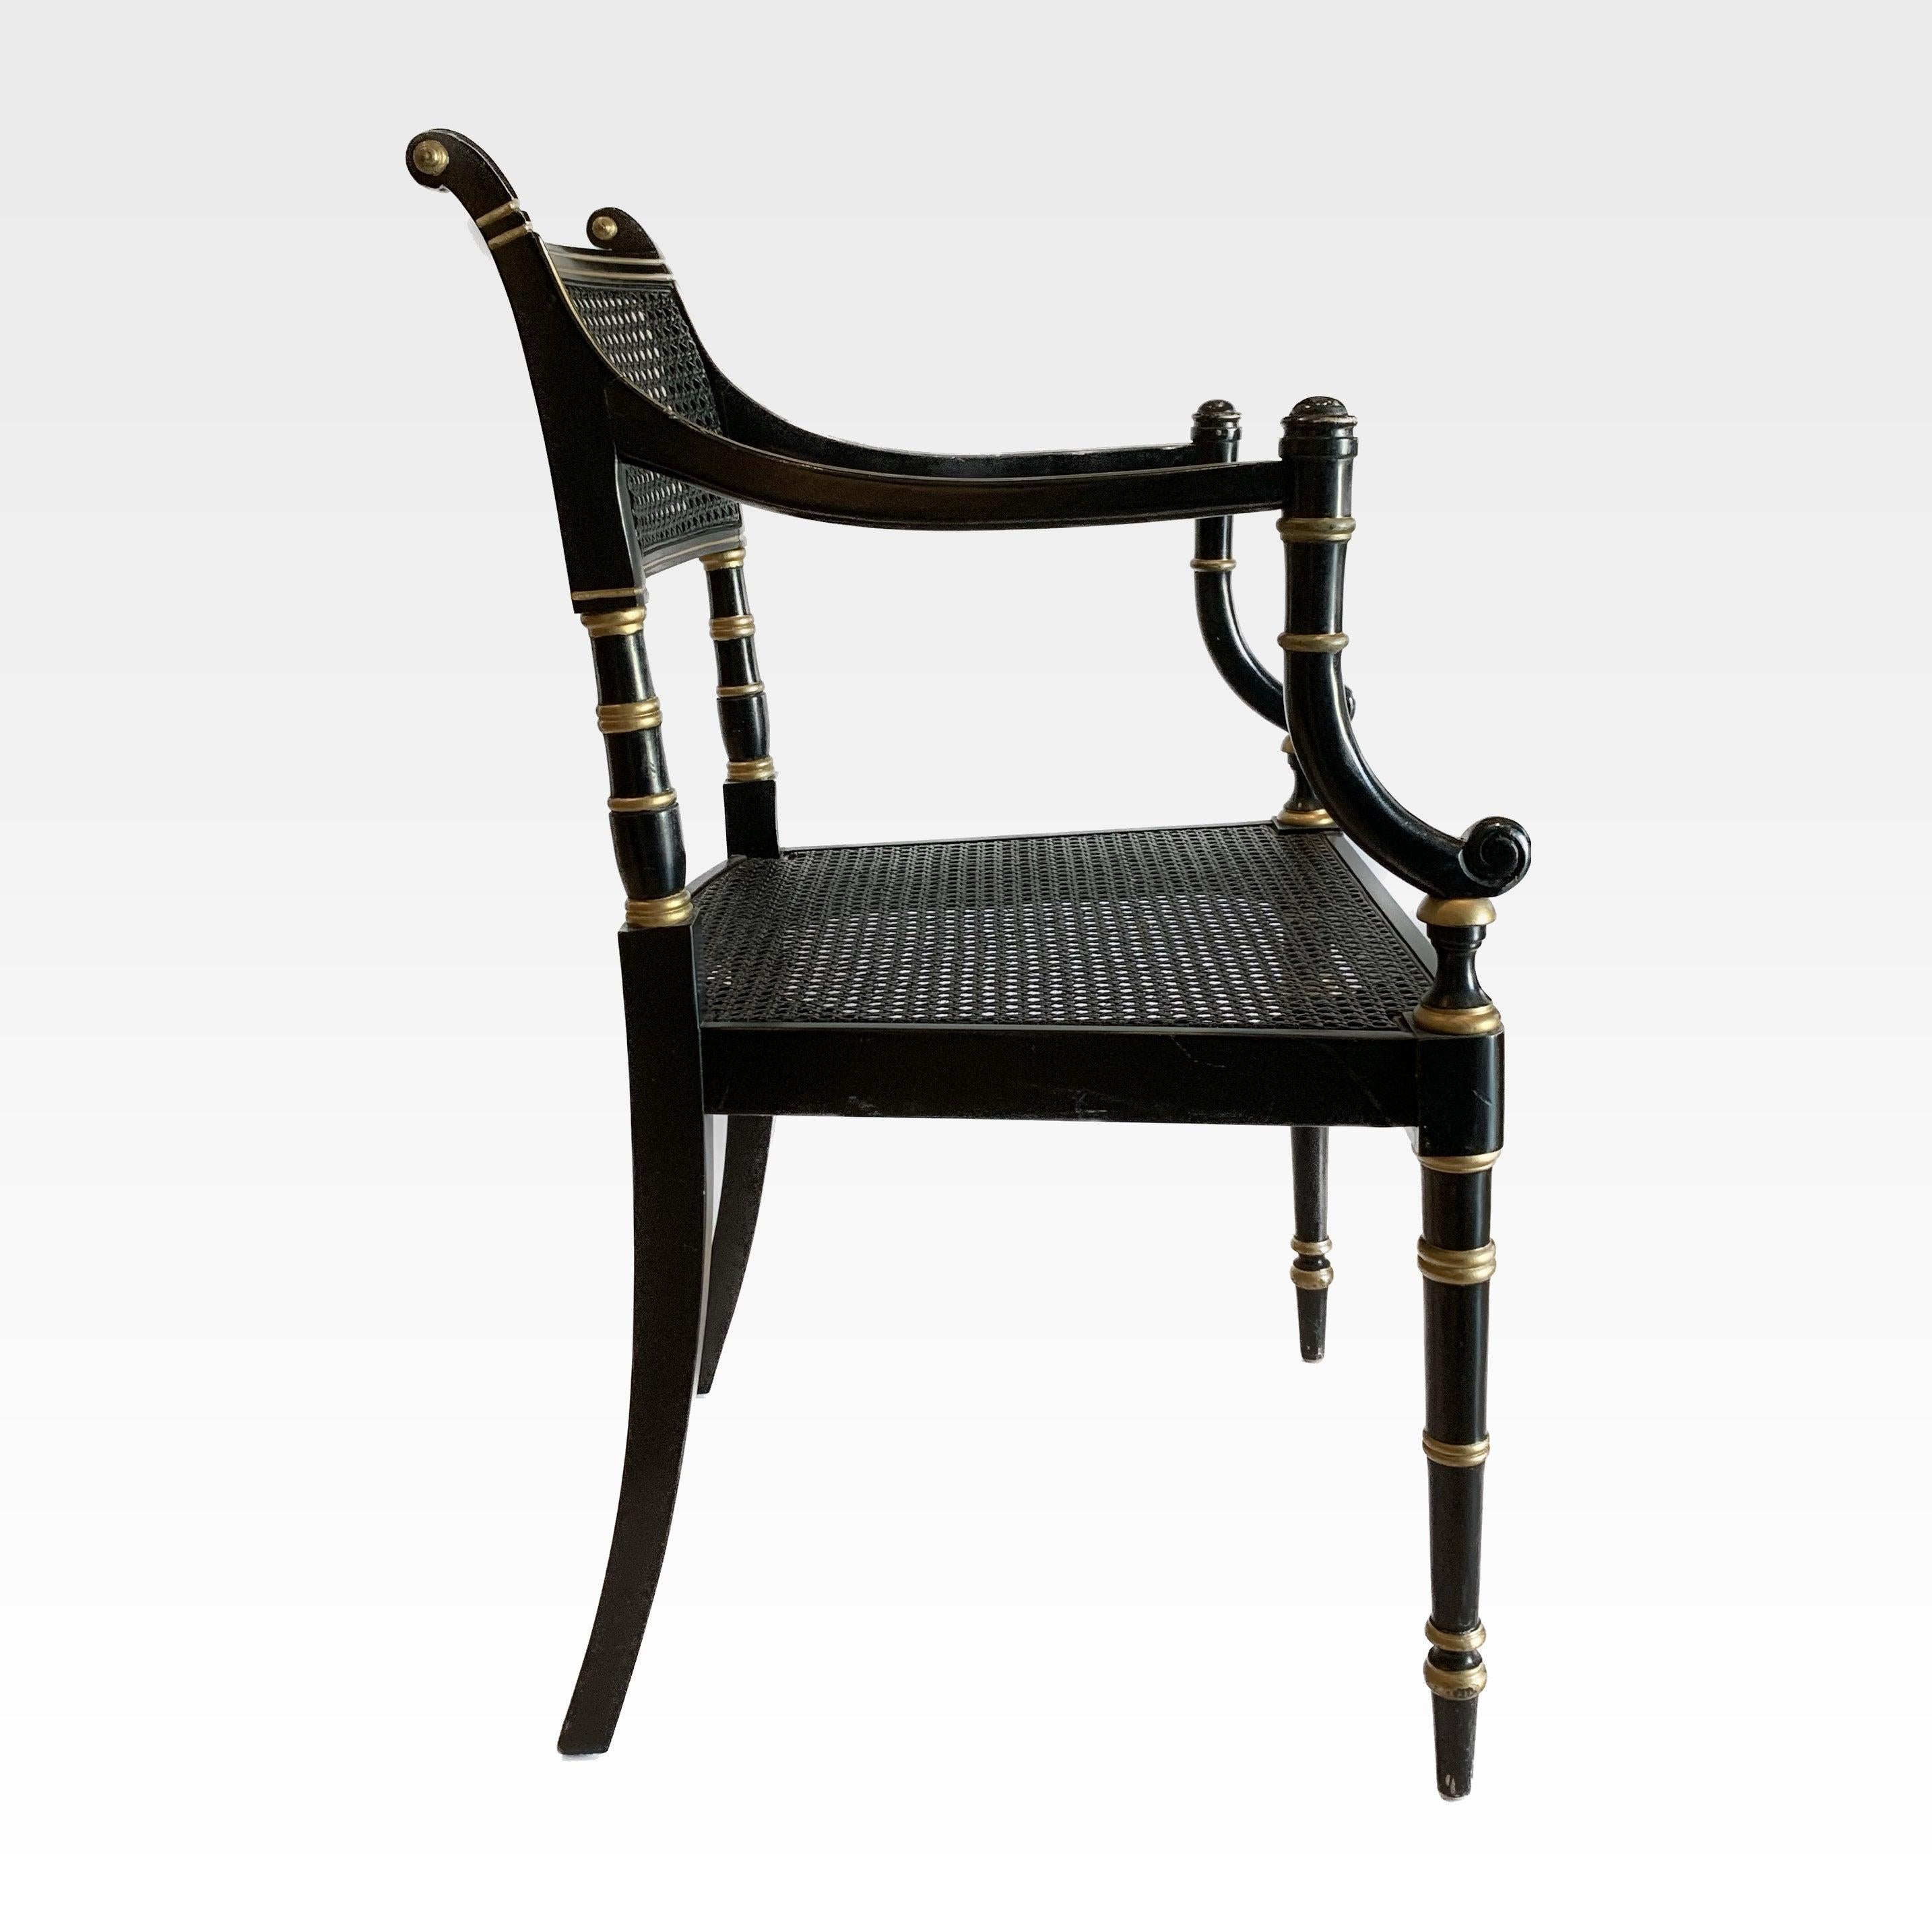 Pair of 20th Century ebonized and gilt Regency style cane chairs with newly upholstered loose seat cushion in ticking. 

These chairs are professionally upholstered and are also available C.O.M. with a quick turnaround. Press inquire for